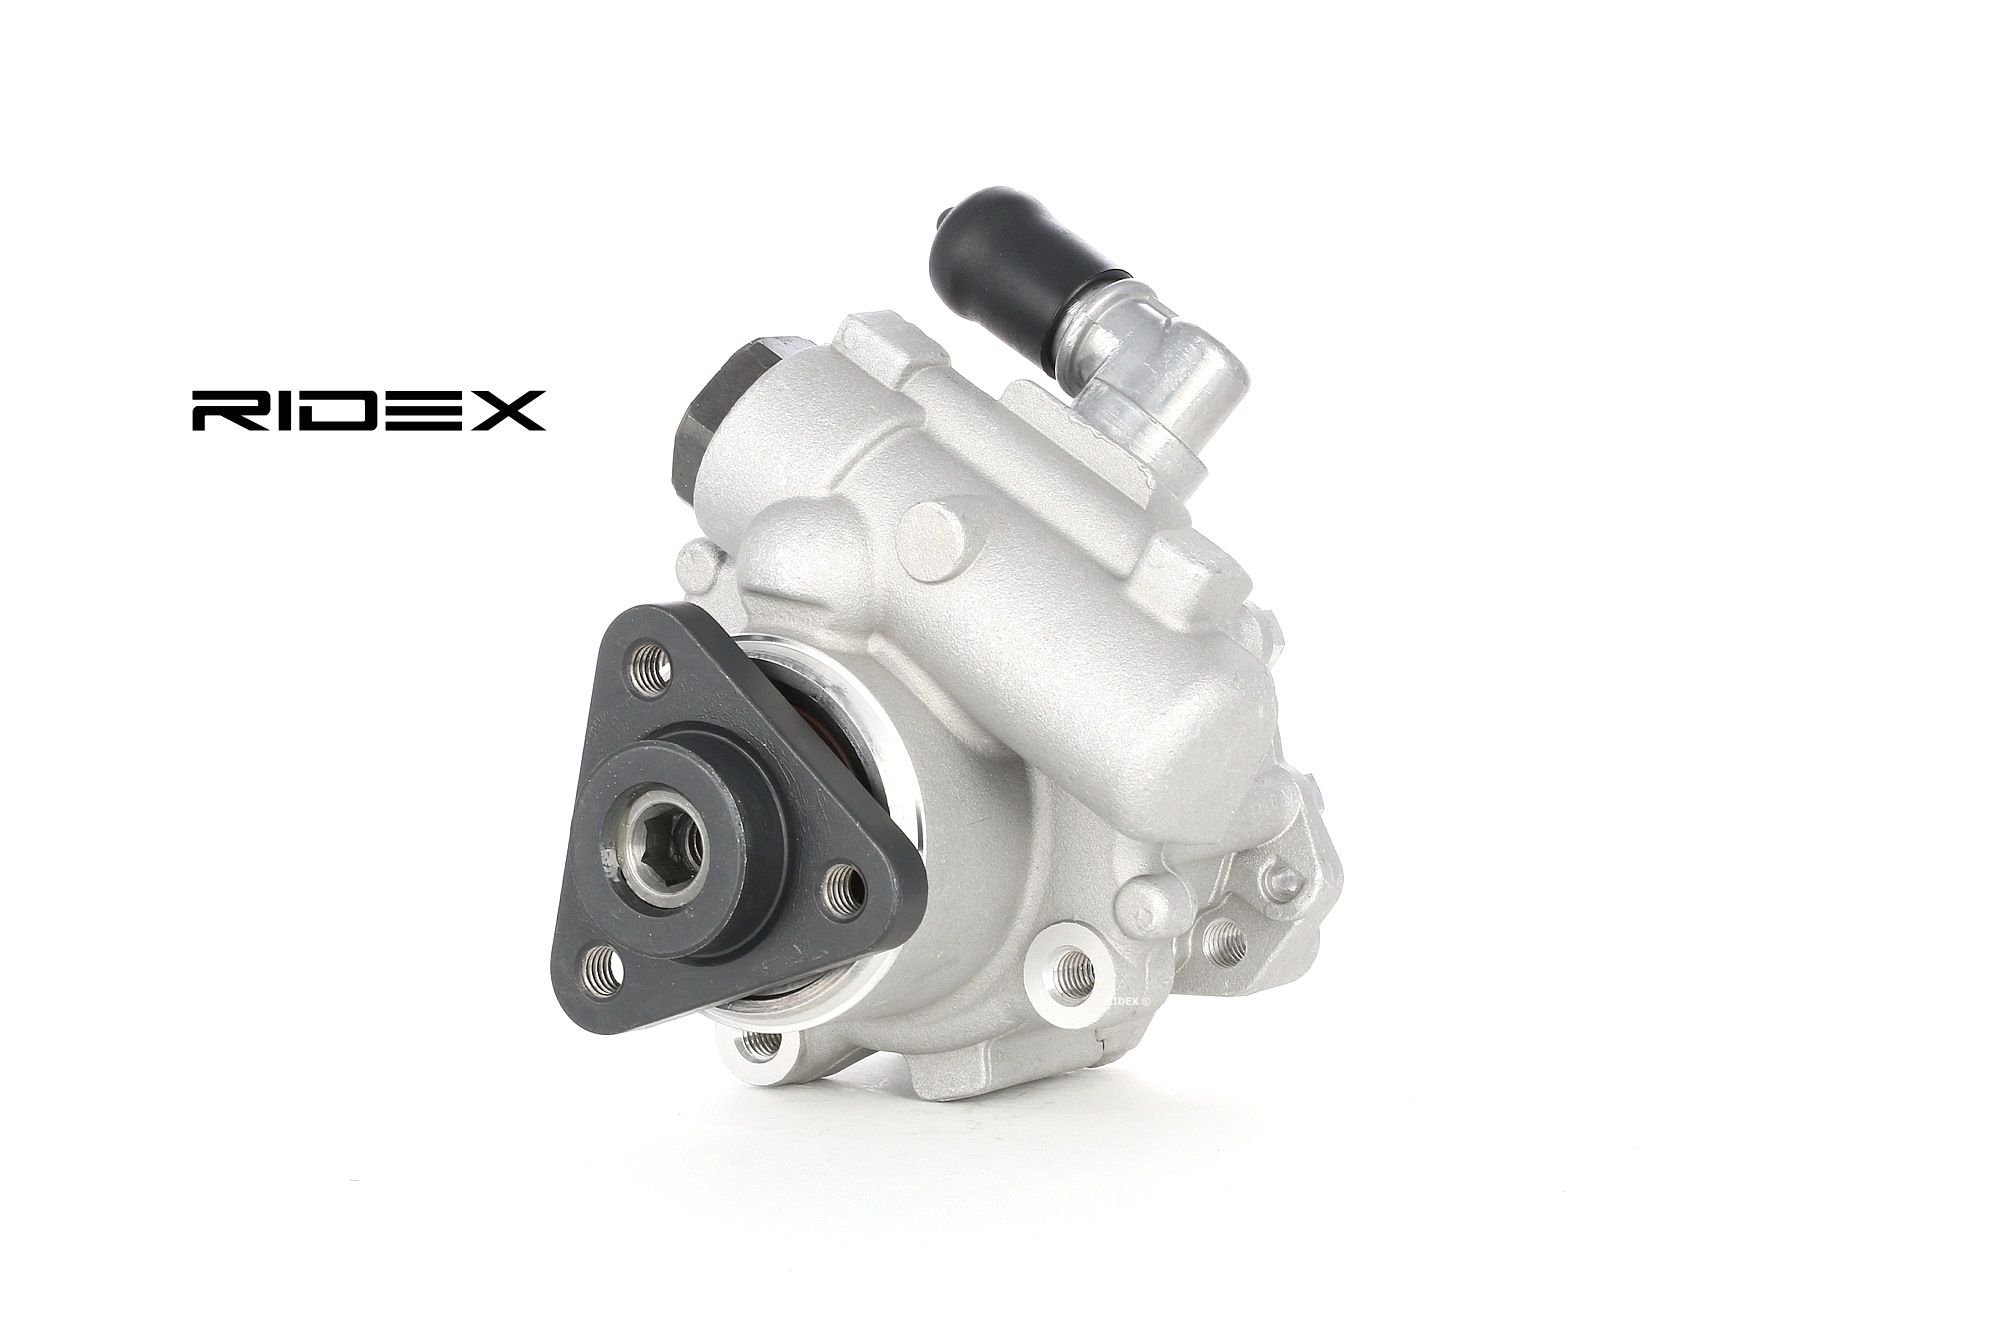 Image of RIDEX Power Steering Pump AUDI 12H0030 4F0145155P,4E0145155K,4E0145156B Steering Pump,EHPS,EHPS Pump,Hydraulic Pump, steering system 4F0145155A